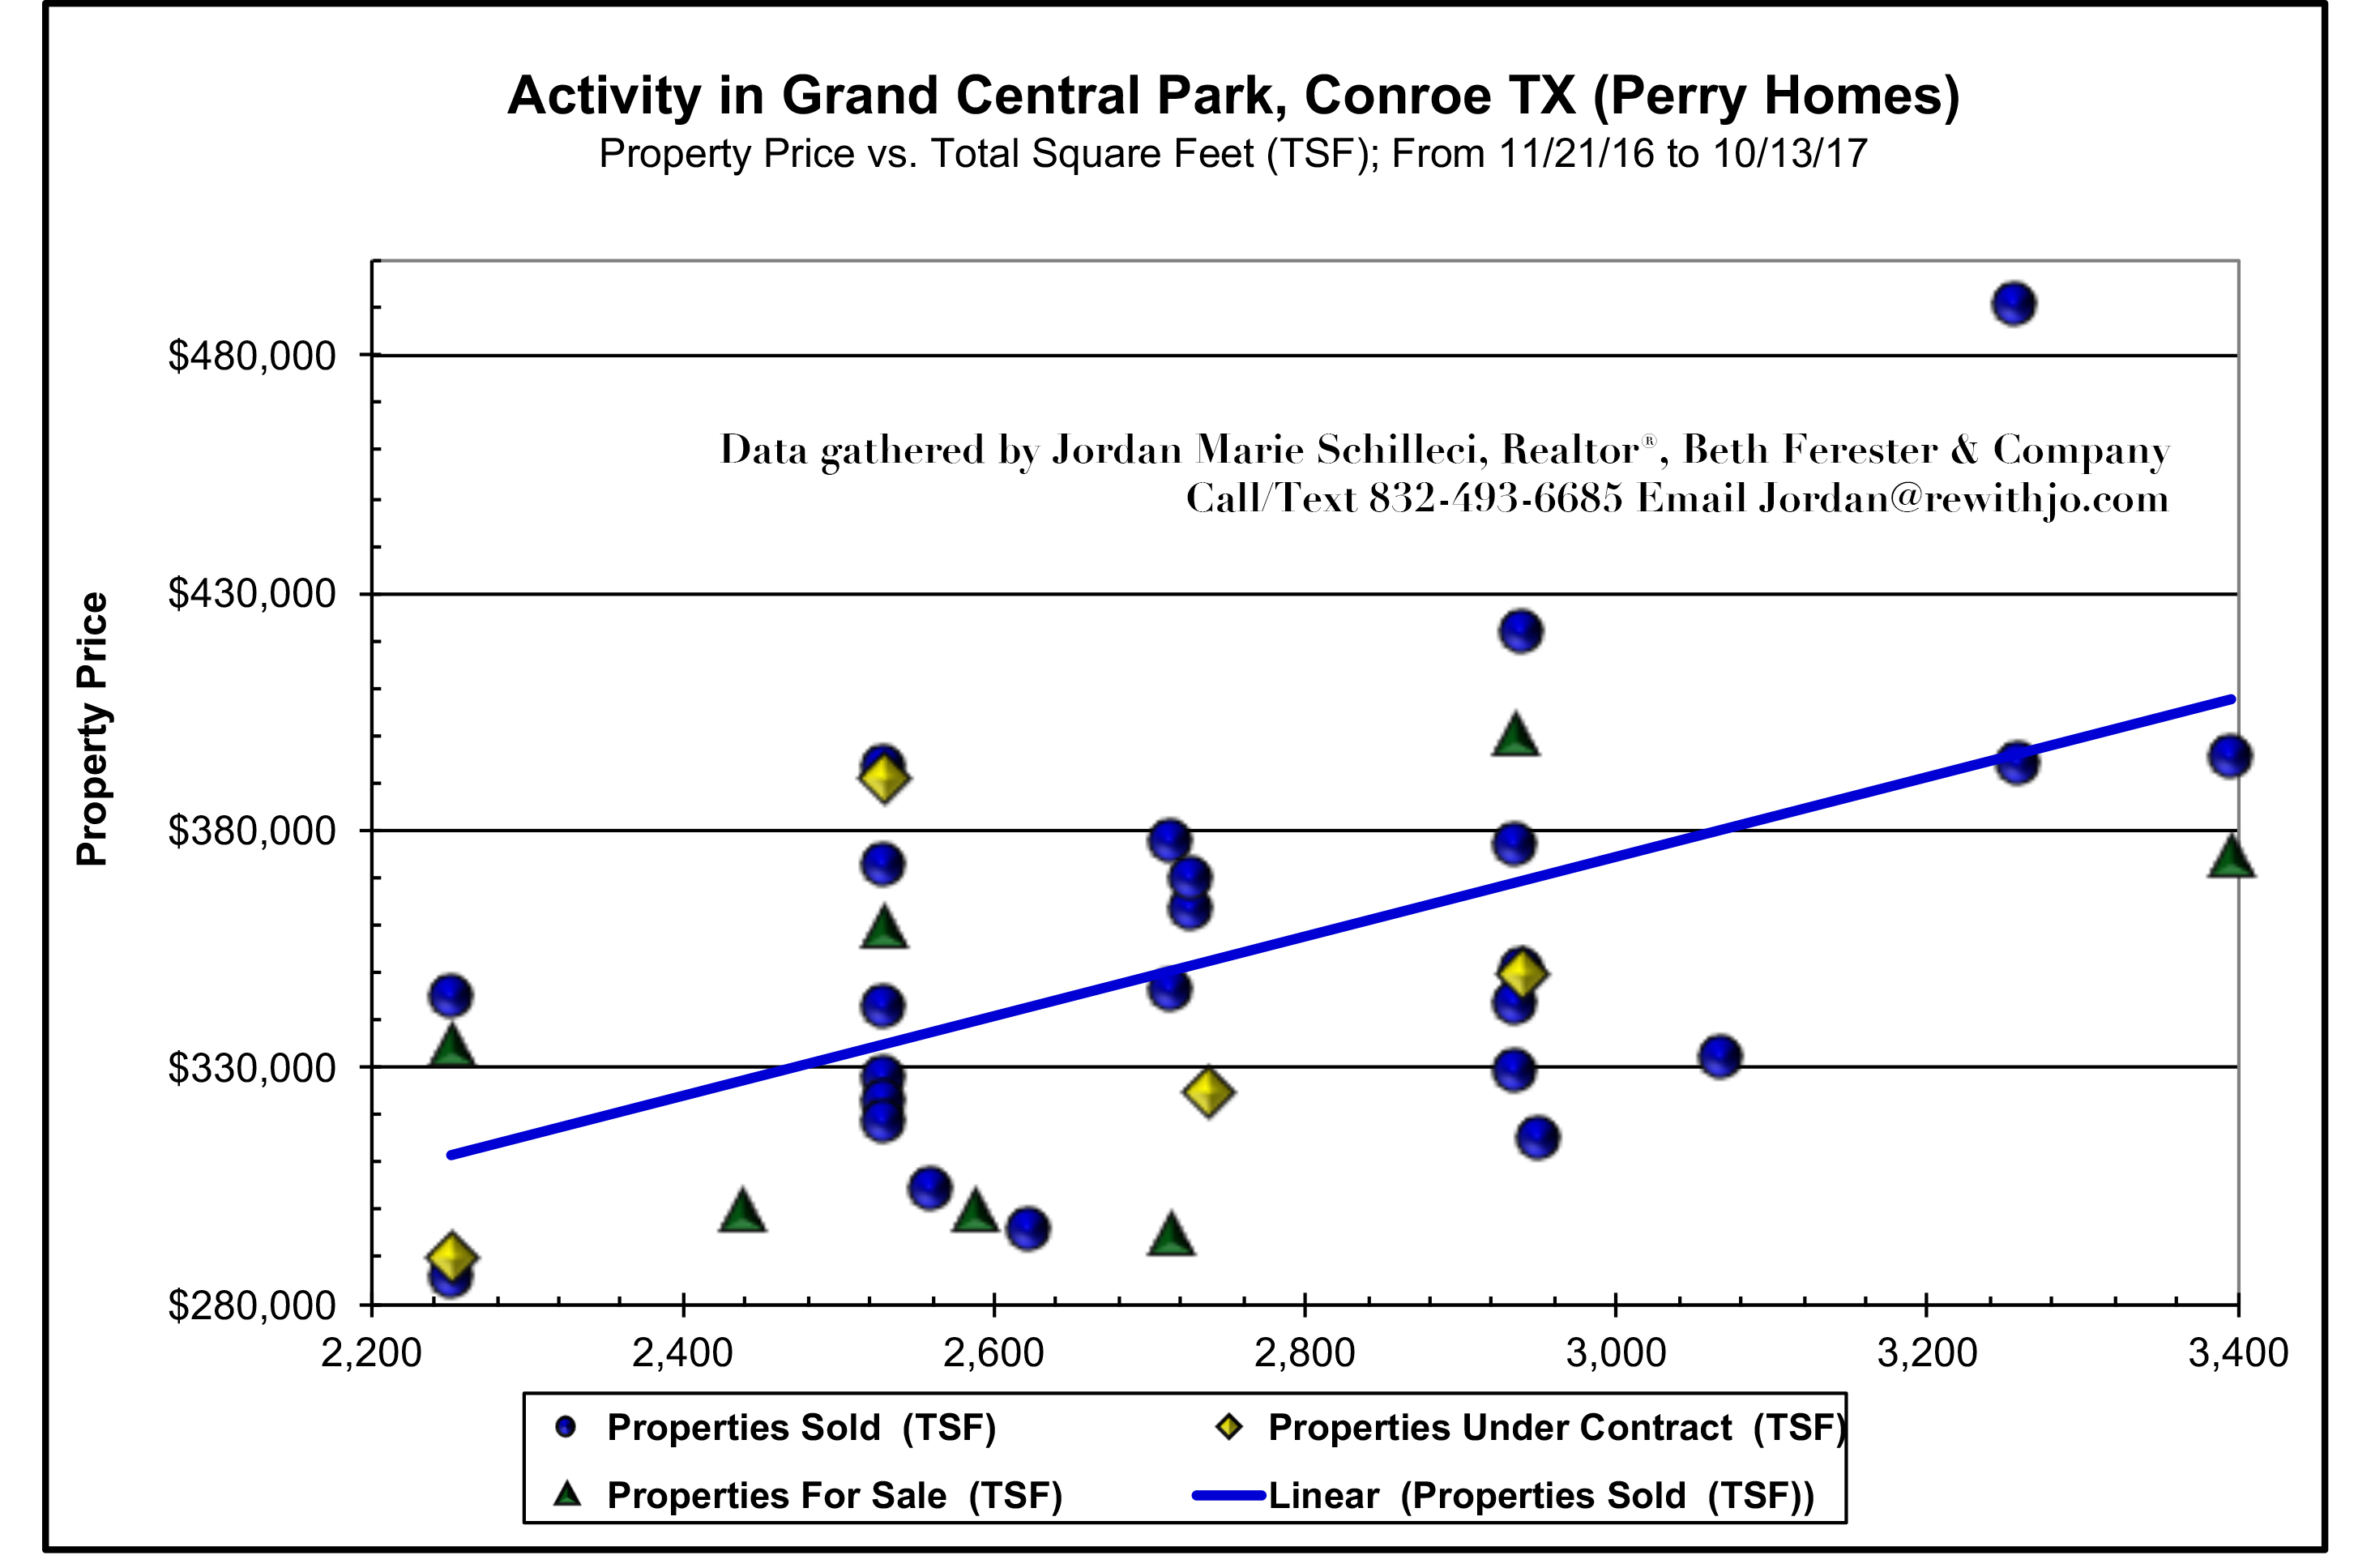 Perry-Homes-Grand-Central-Park-Conroe-Texas-Mid-October-2017-Market-Update